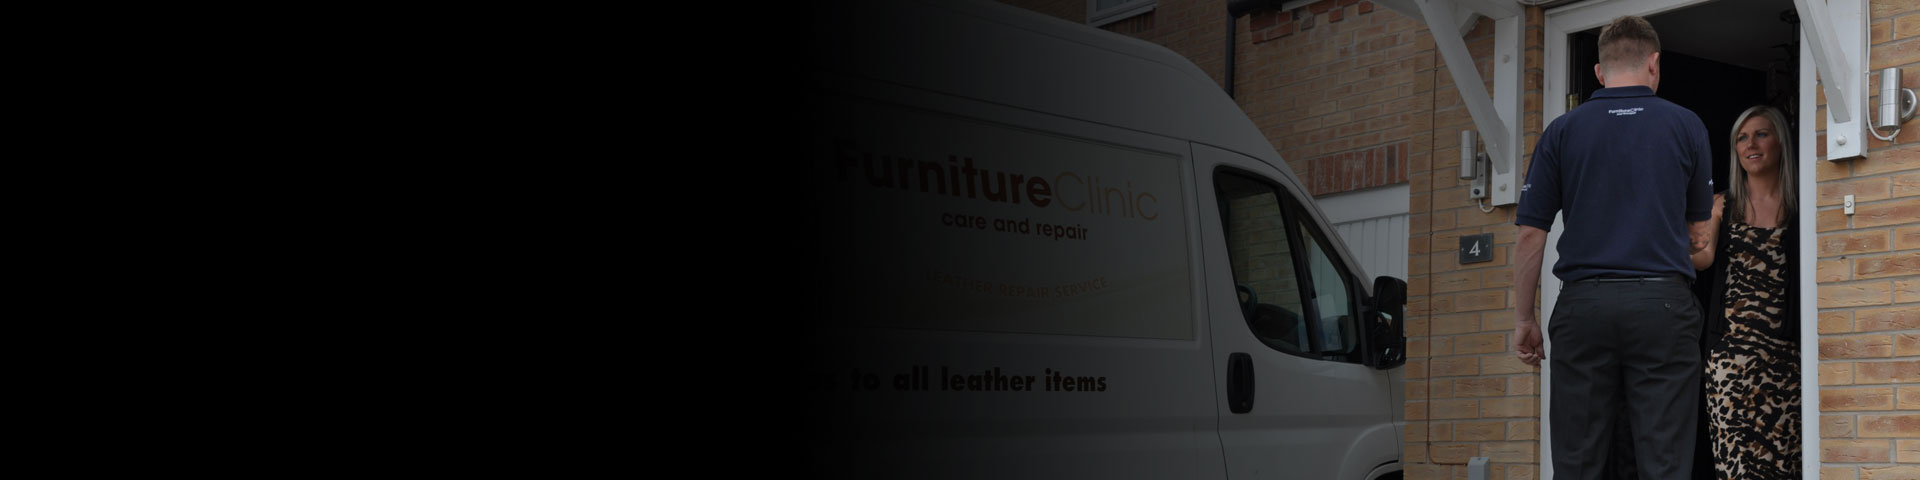 Furniture Clinic North East - In Home Service